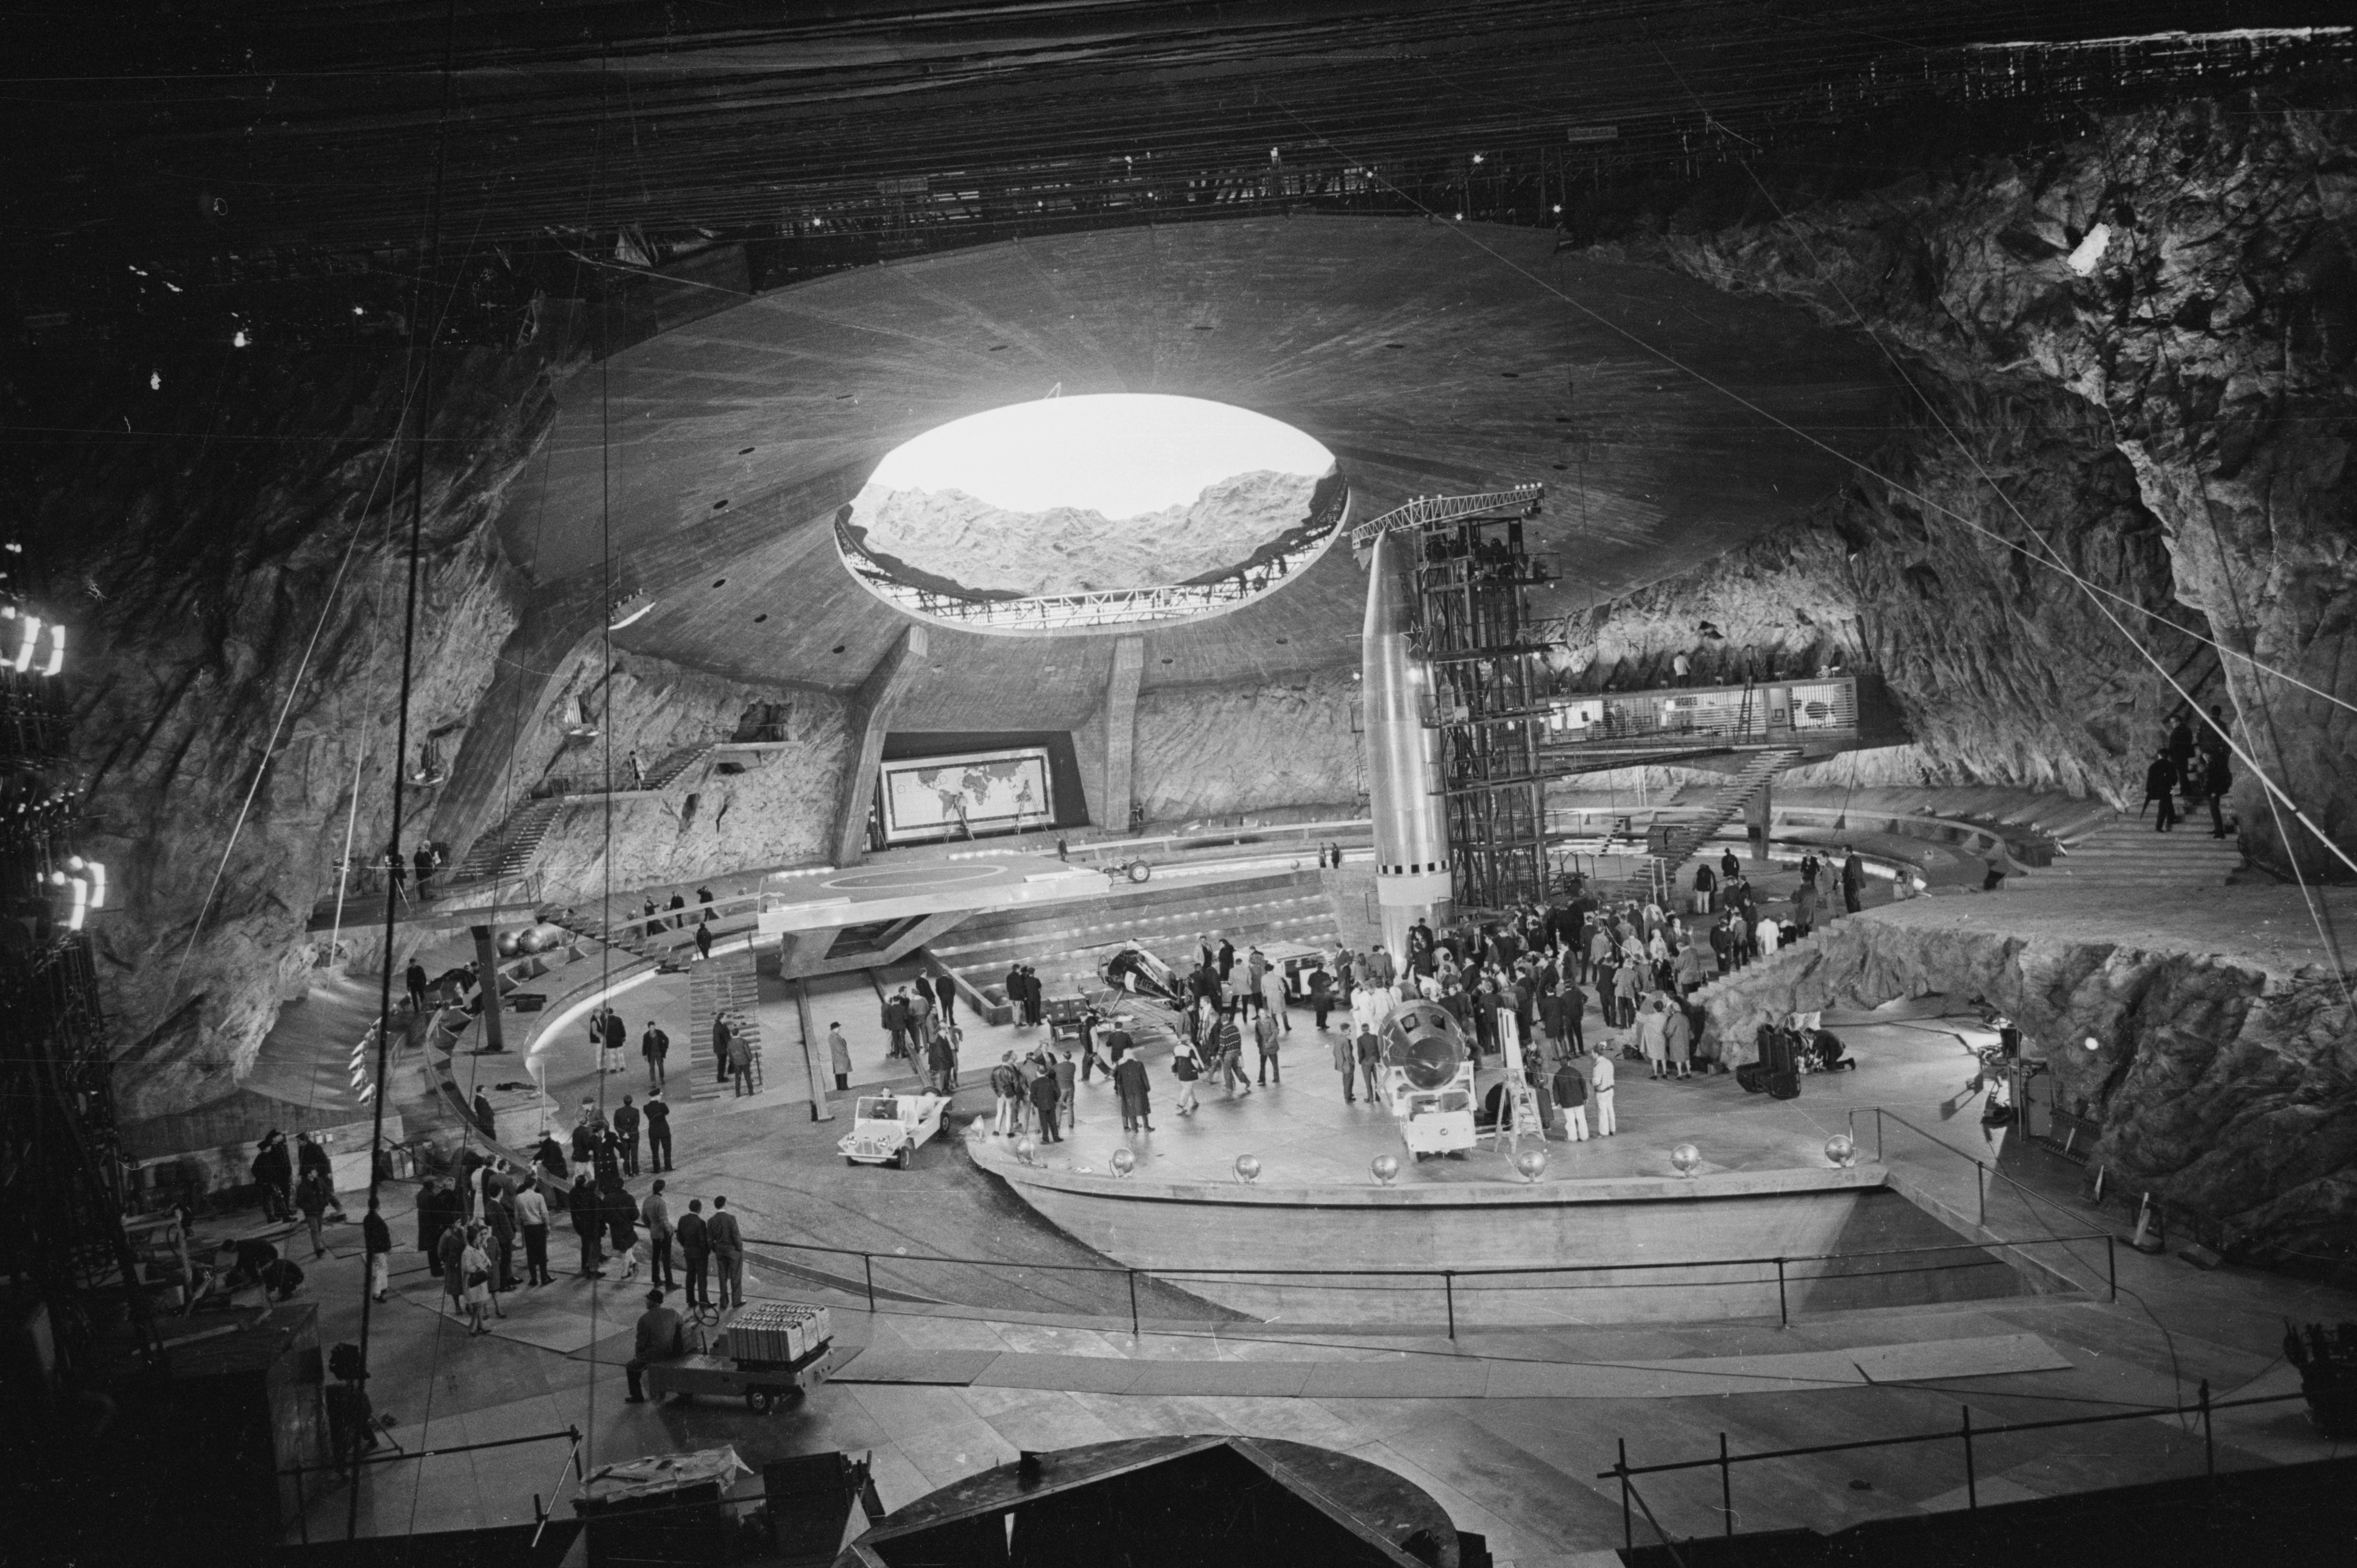 28th-October-1966-The-massive-purpose-built-set-of-the-new-Bond-film-You-Only-Live-Twice-at-Pinewood-Studios.-Photo-by-Larry-Ellis.jpg